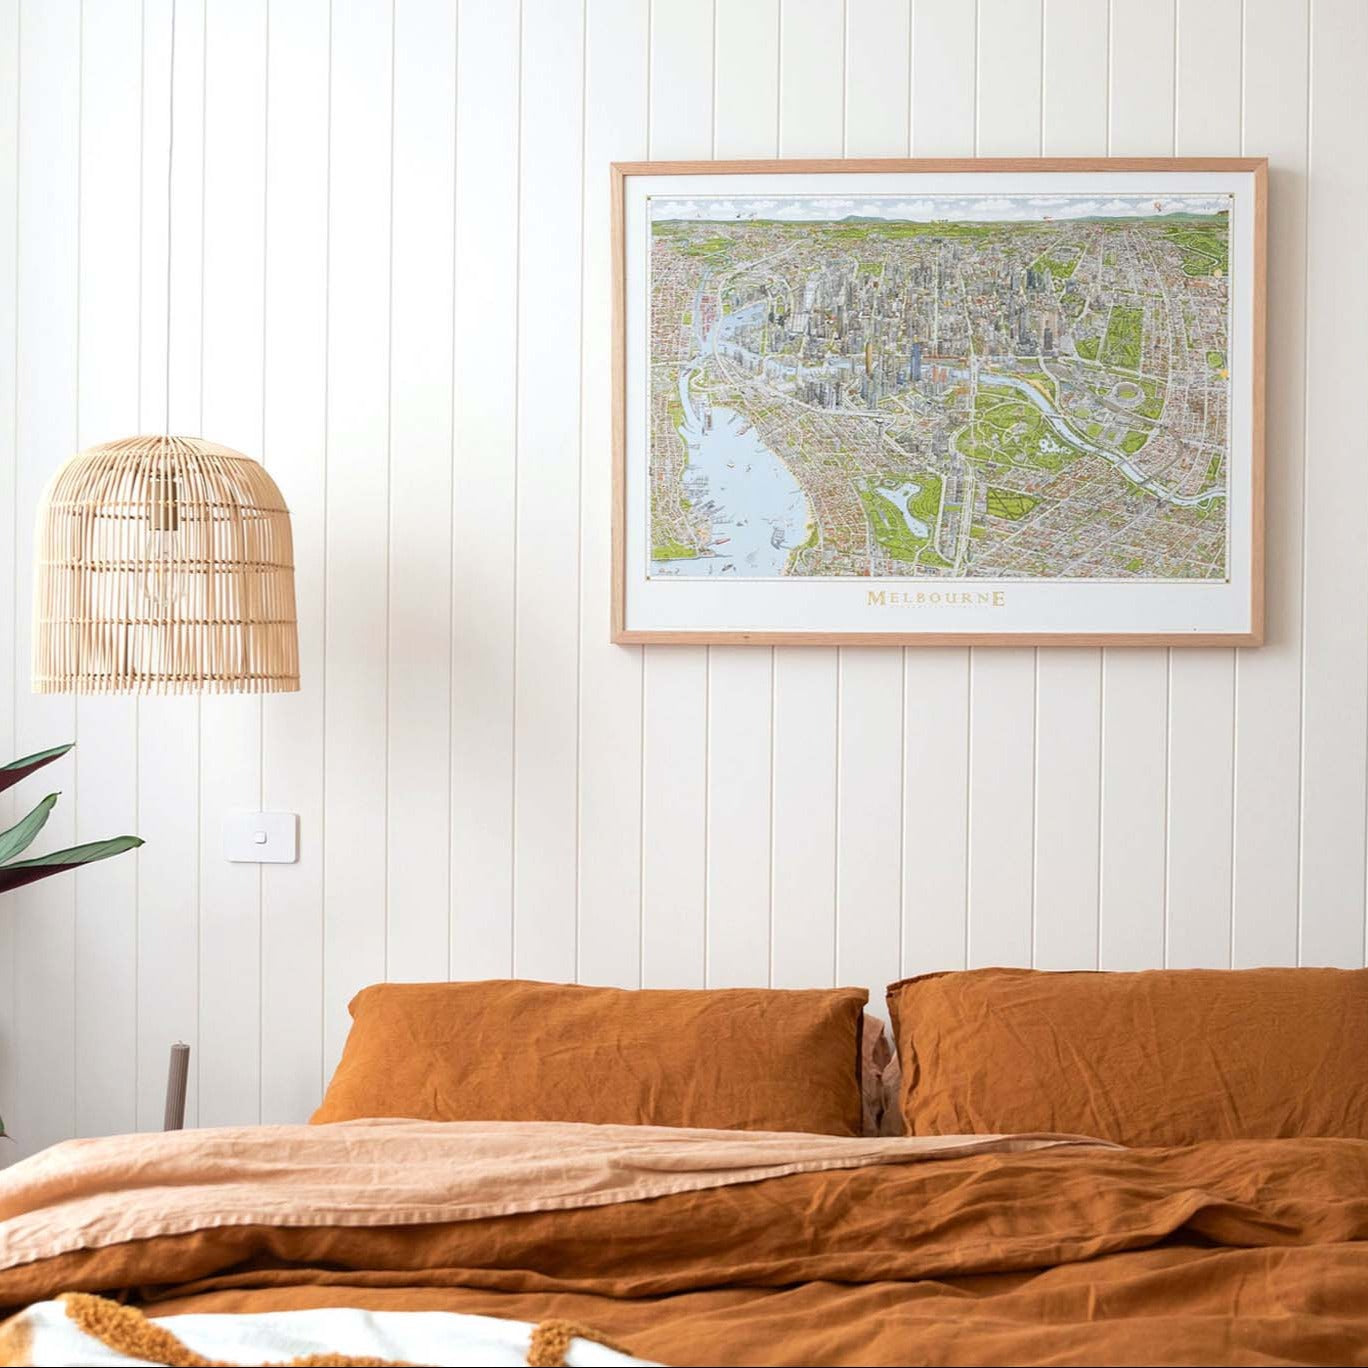 A large sized colour open edition of The Melbourne Map in an oak frame positioned above a bed with burnt orange linen and a rattan pendant light